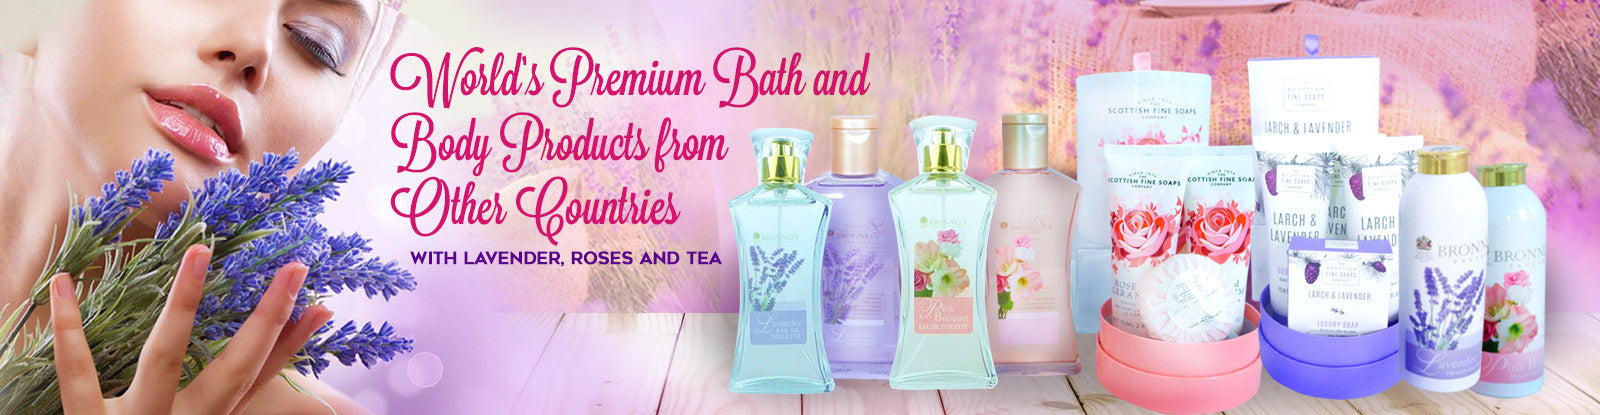 World's Premium Bath and Body with Lavender & Roses